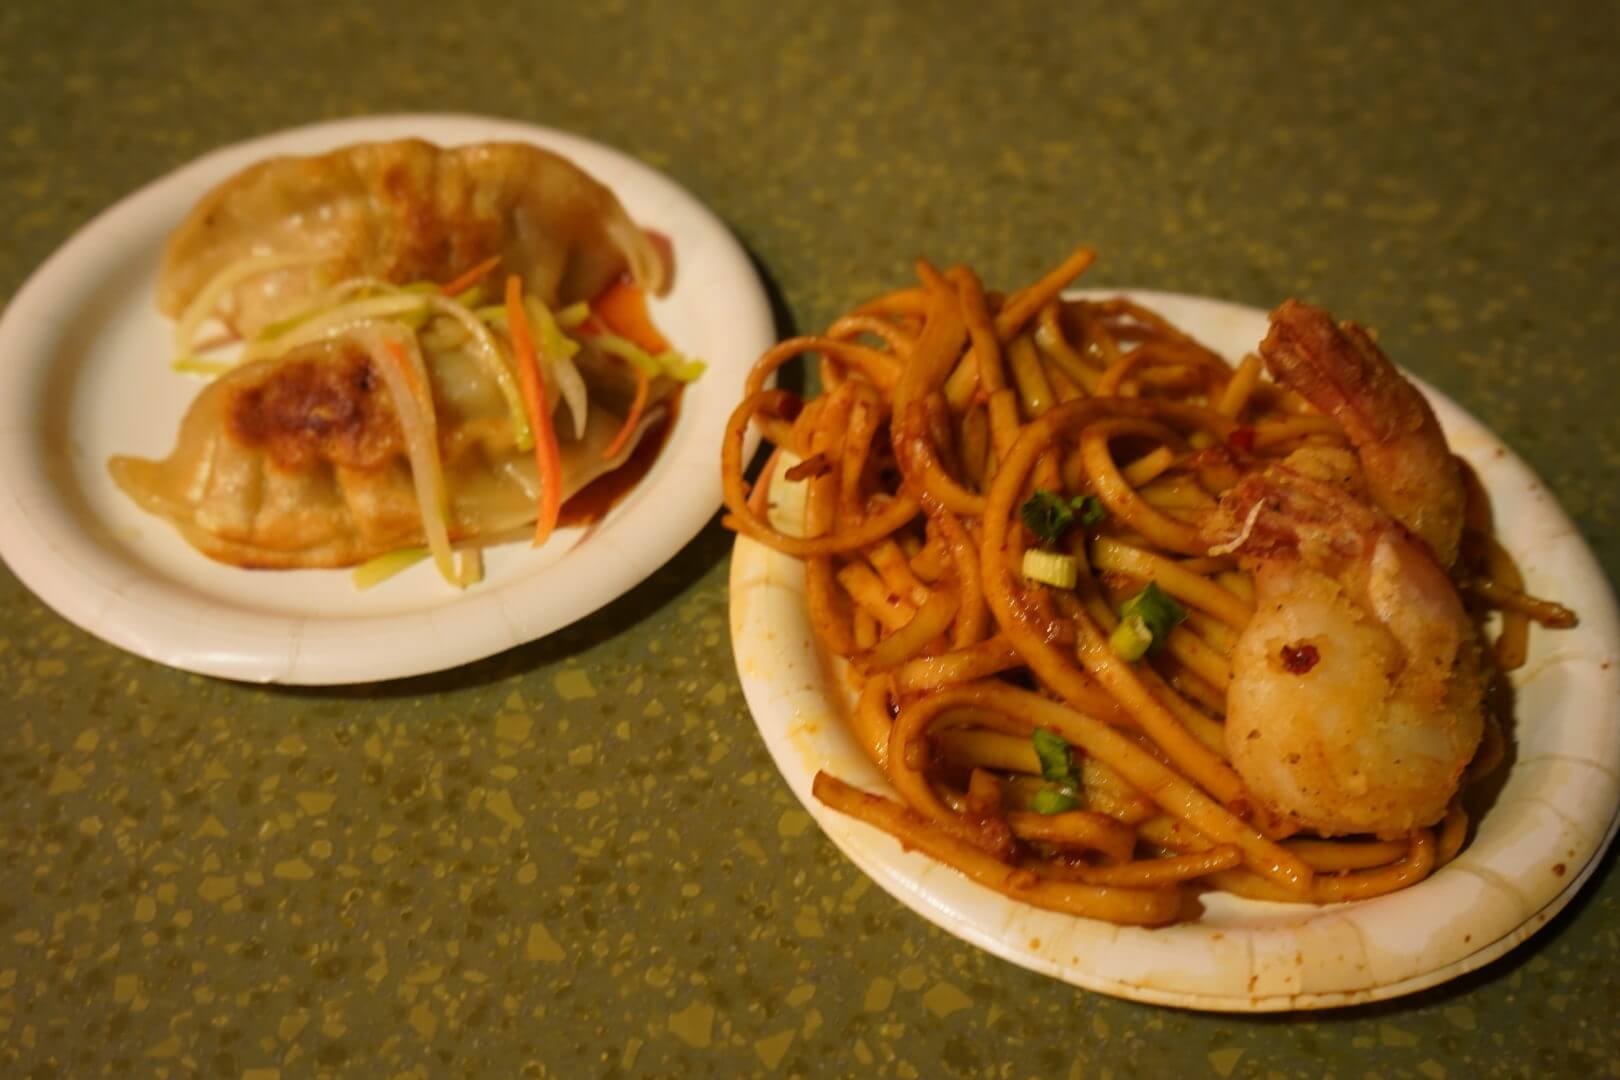 Black Pepper Shrimp with Garlic Noodles and Chicken Dumplings with Chinese Slaw (China) - Epcot Food & Wine